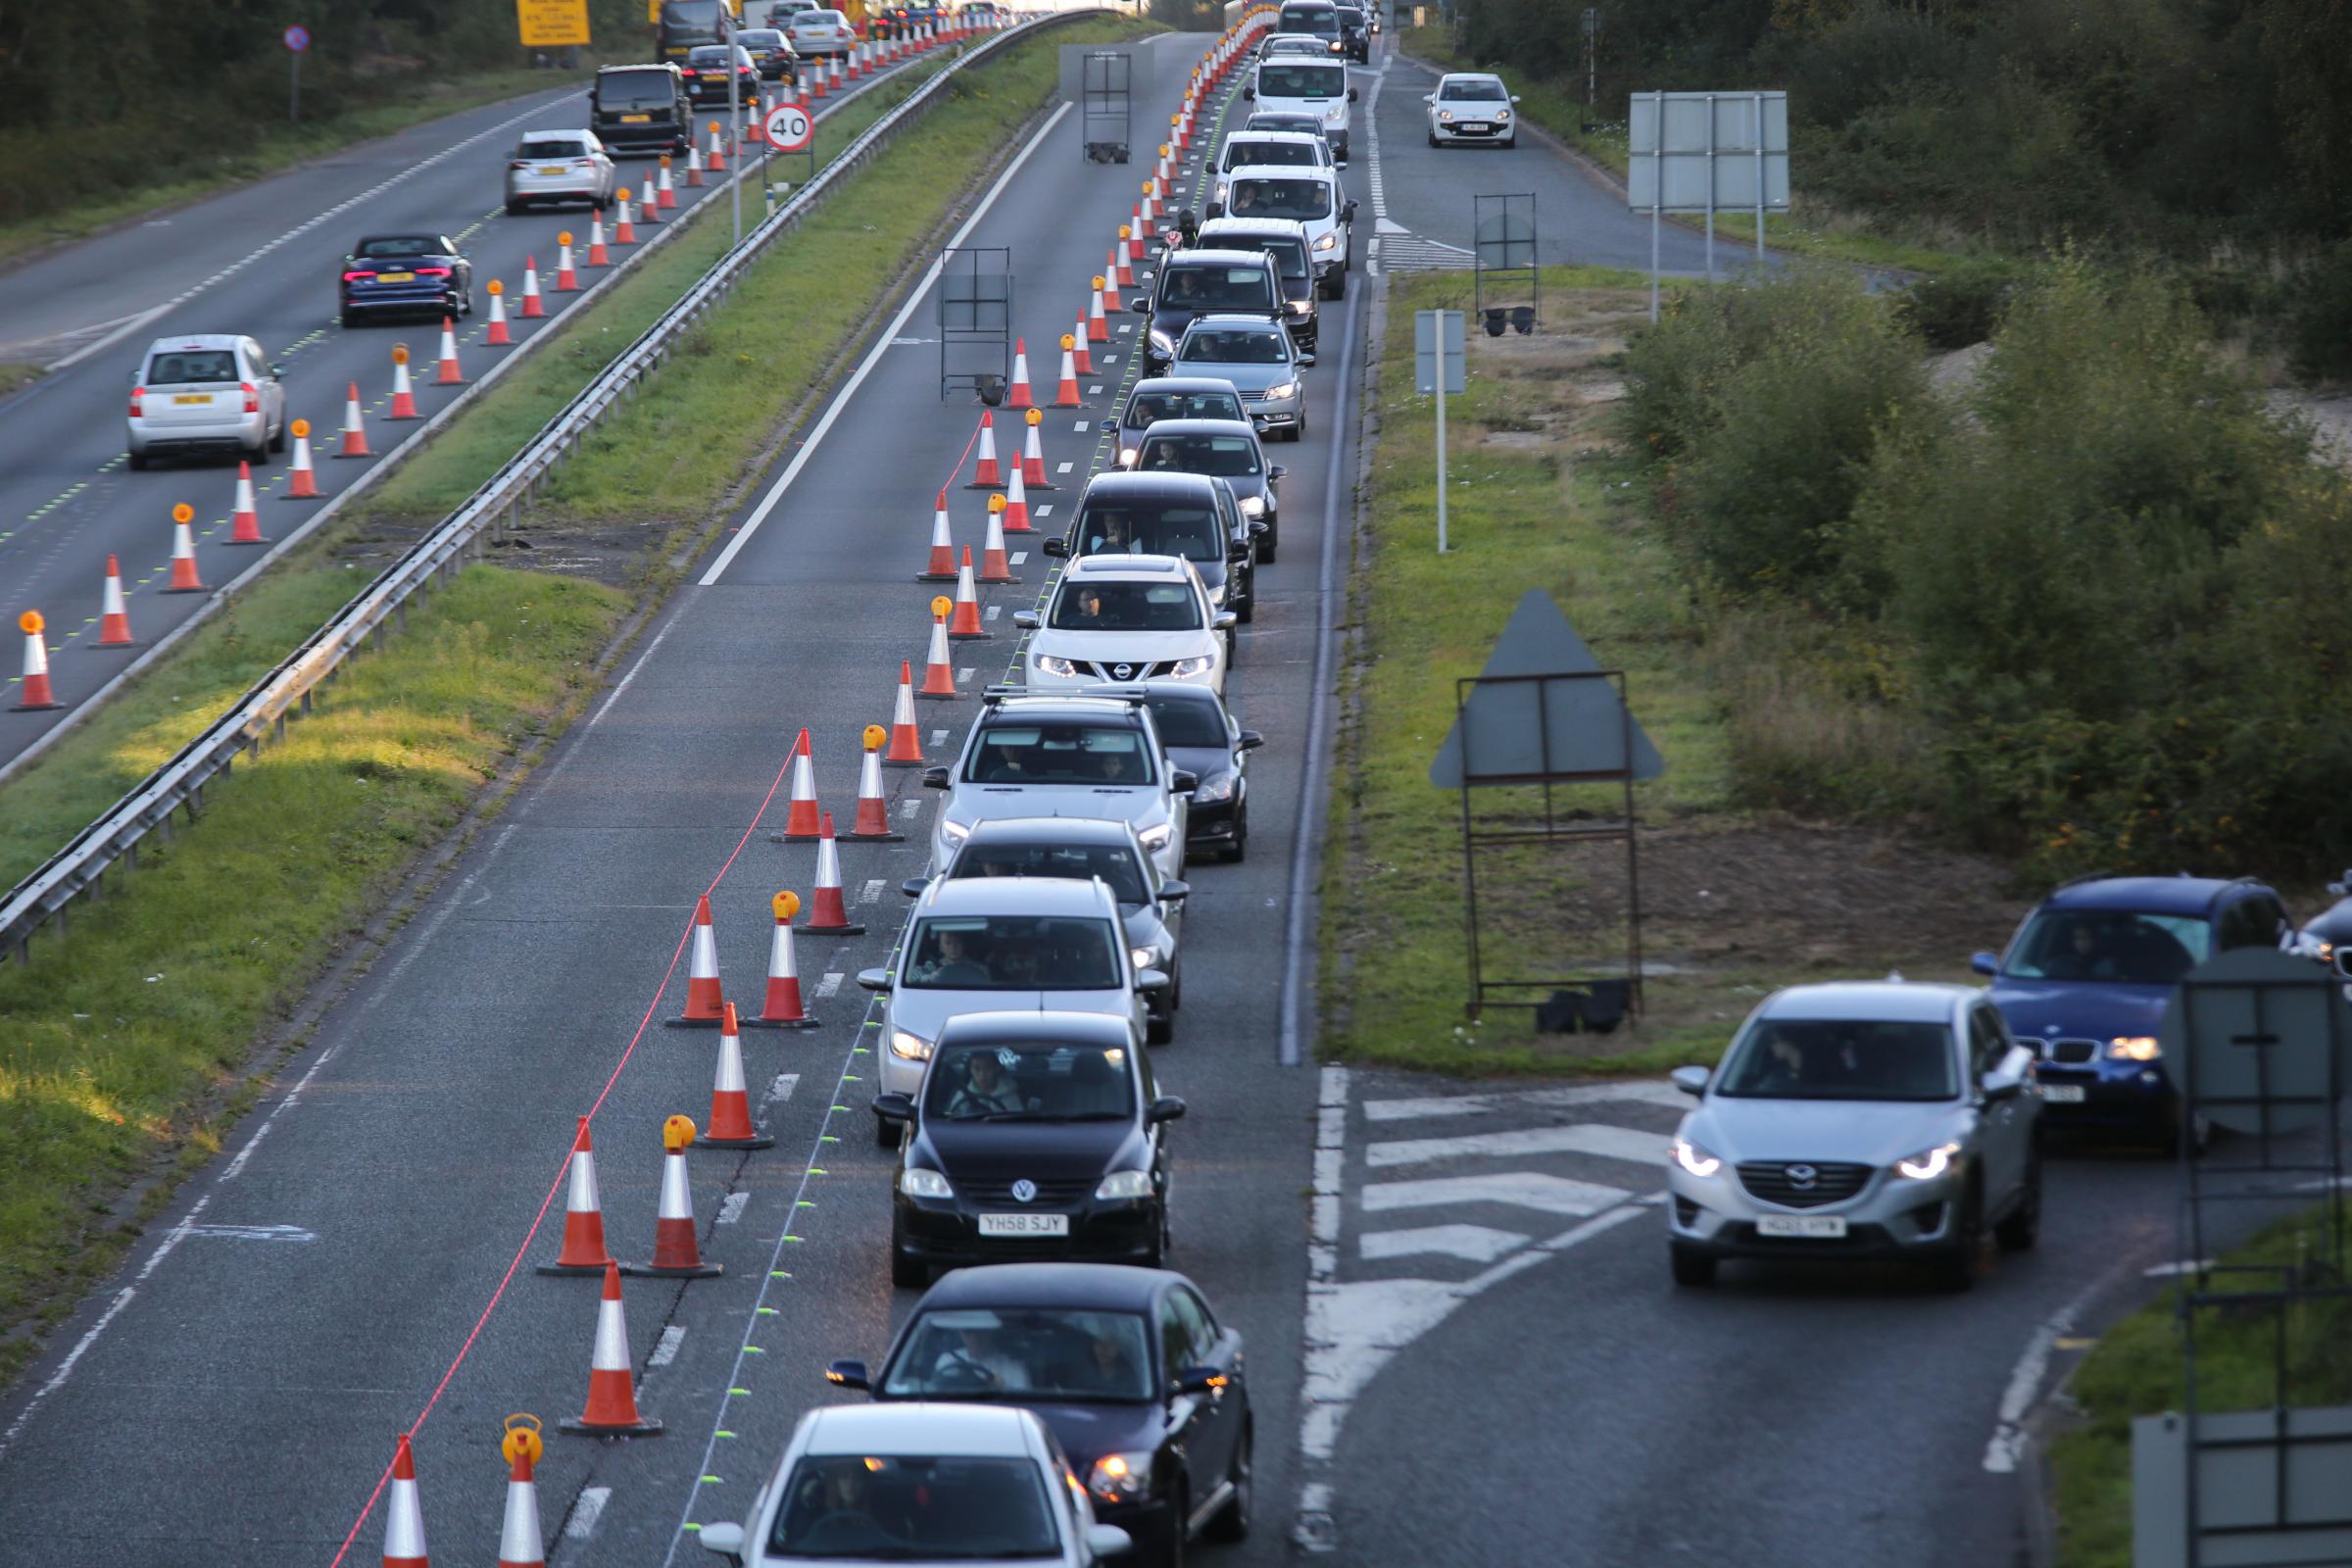 “I have spent hours in my car crying at the traffic”: Drivers tell of A338 roadworks ‘misery’